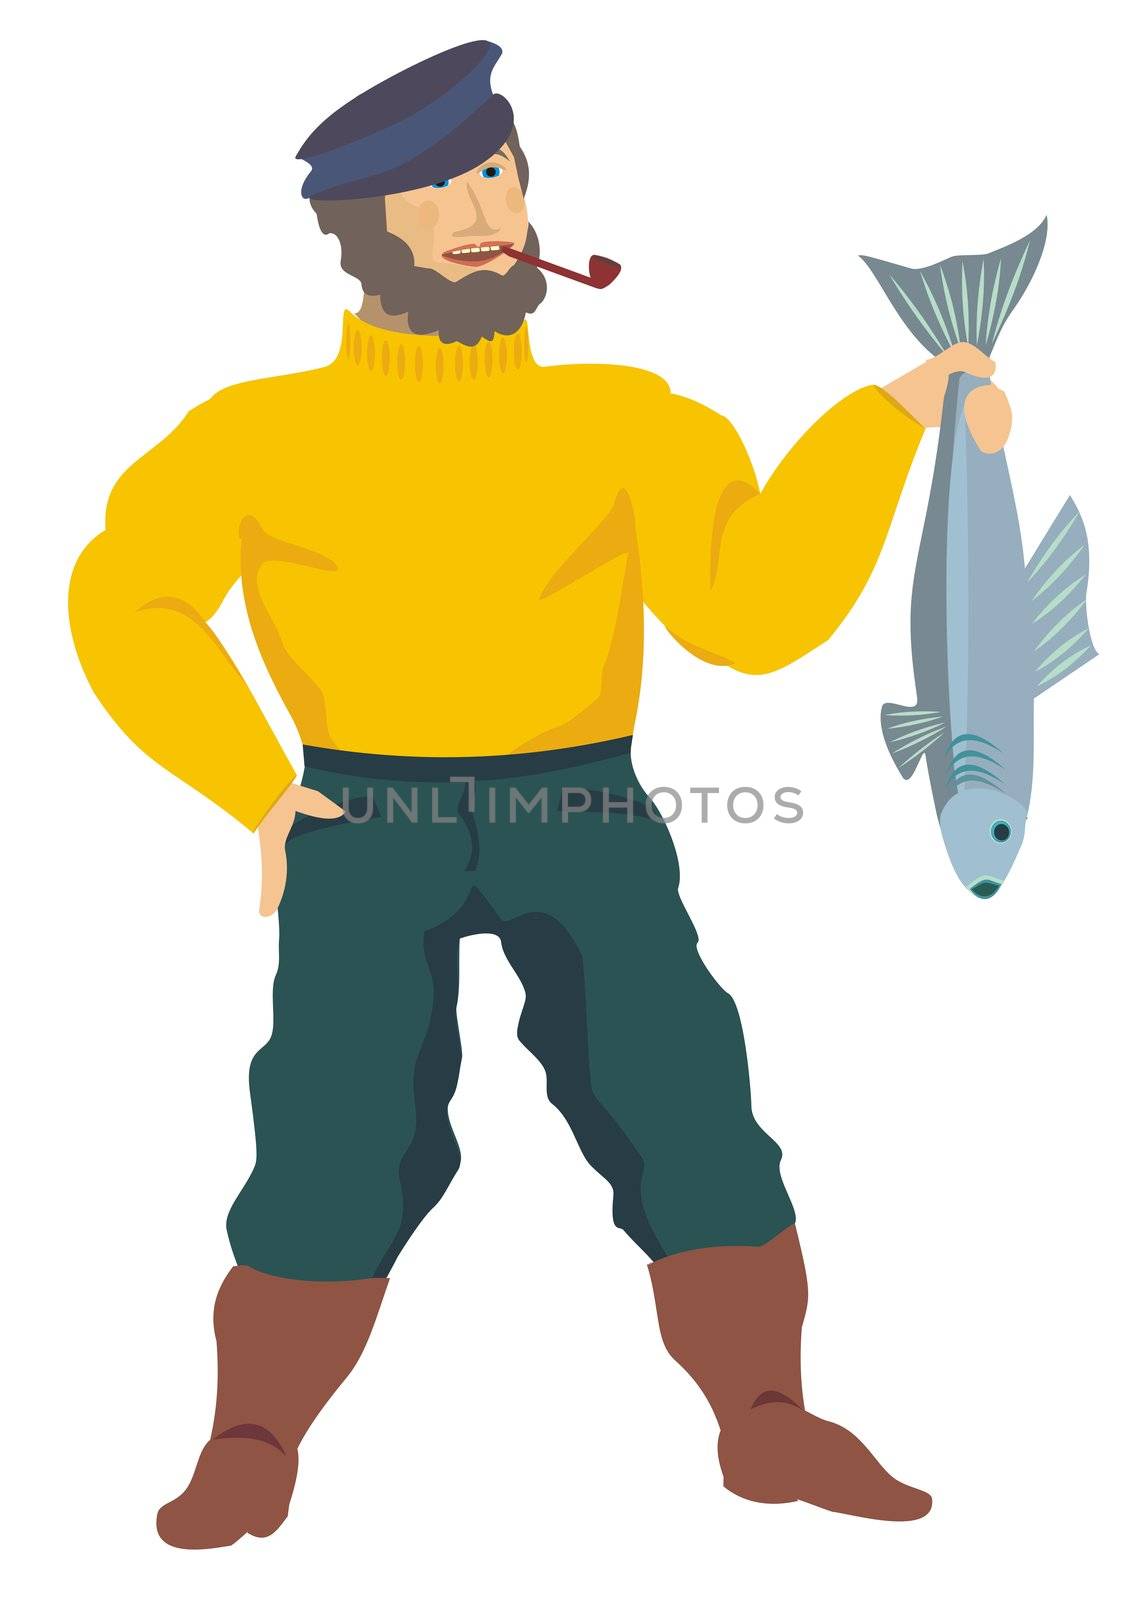 Fisherman presenting a good-sized fish of his last catch, illustration